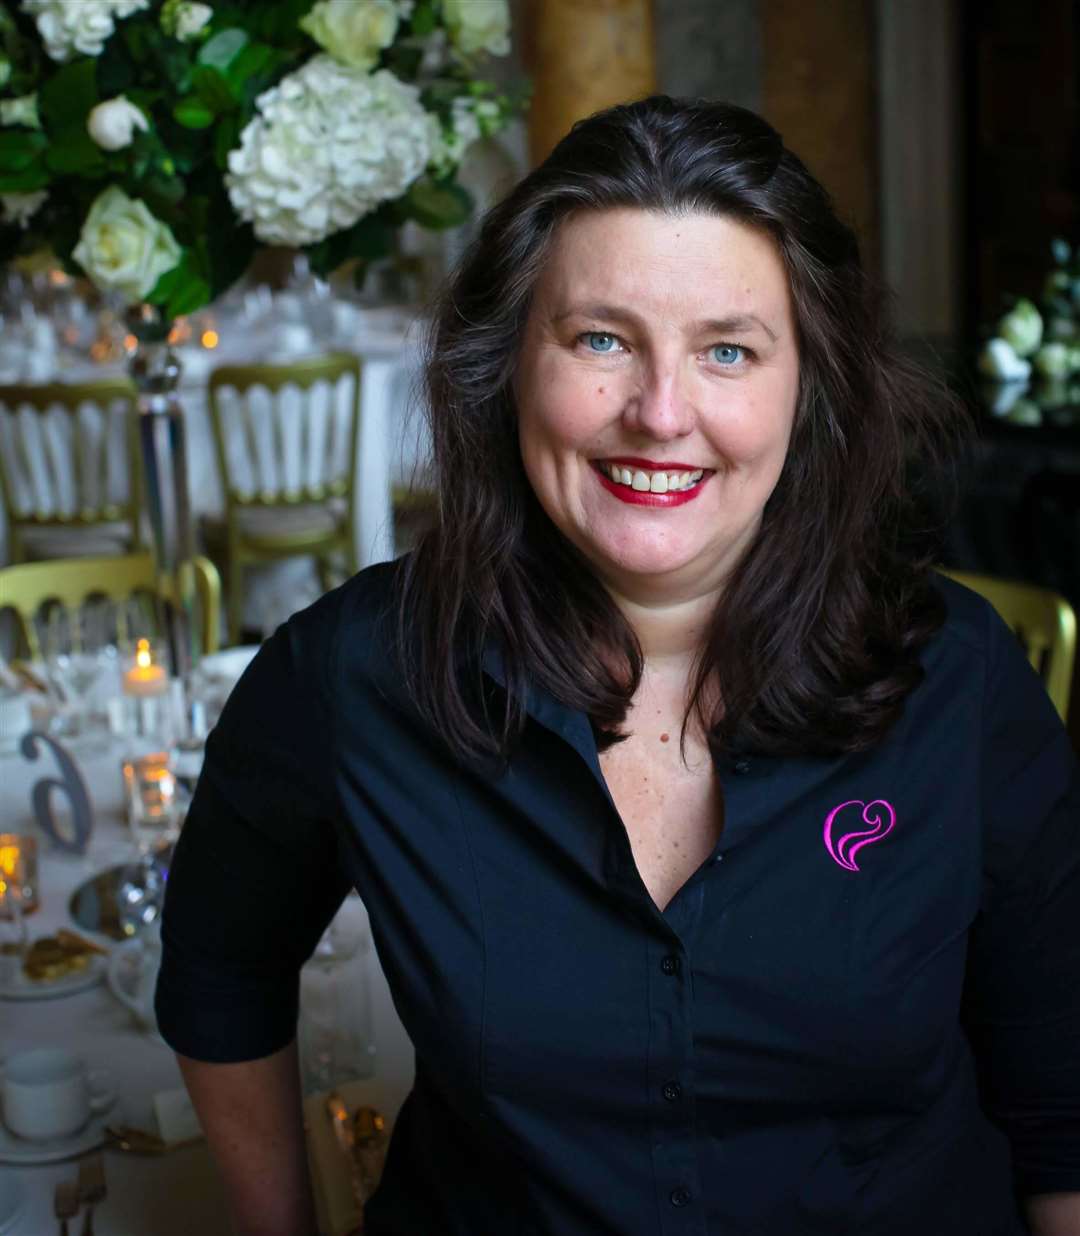 Chic Weddings and Events owner Laurie Edwards painted a bleak picture of the future of the industry following the restrictions